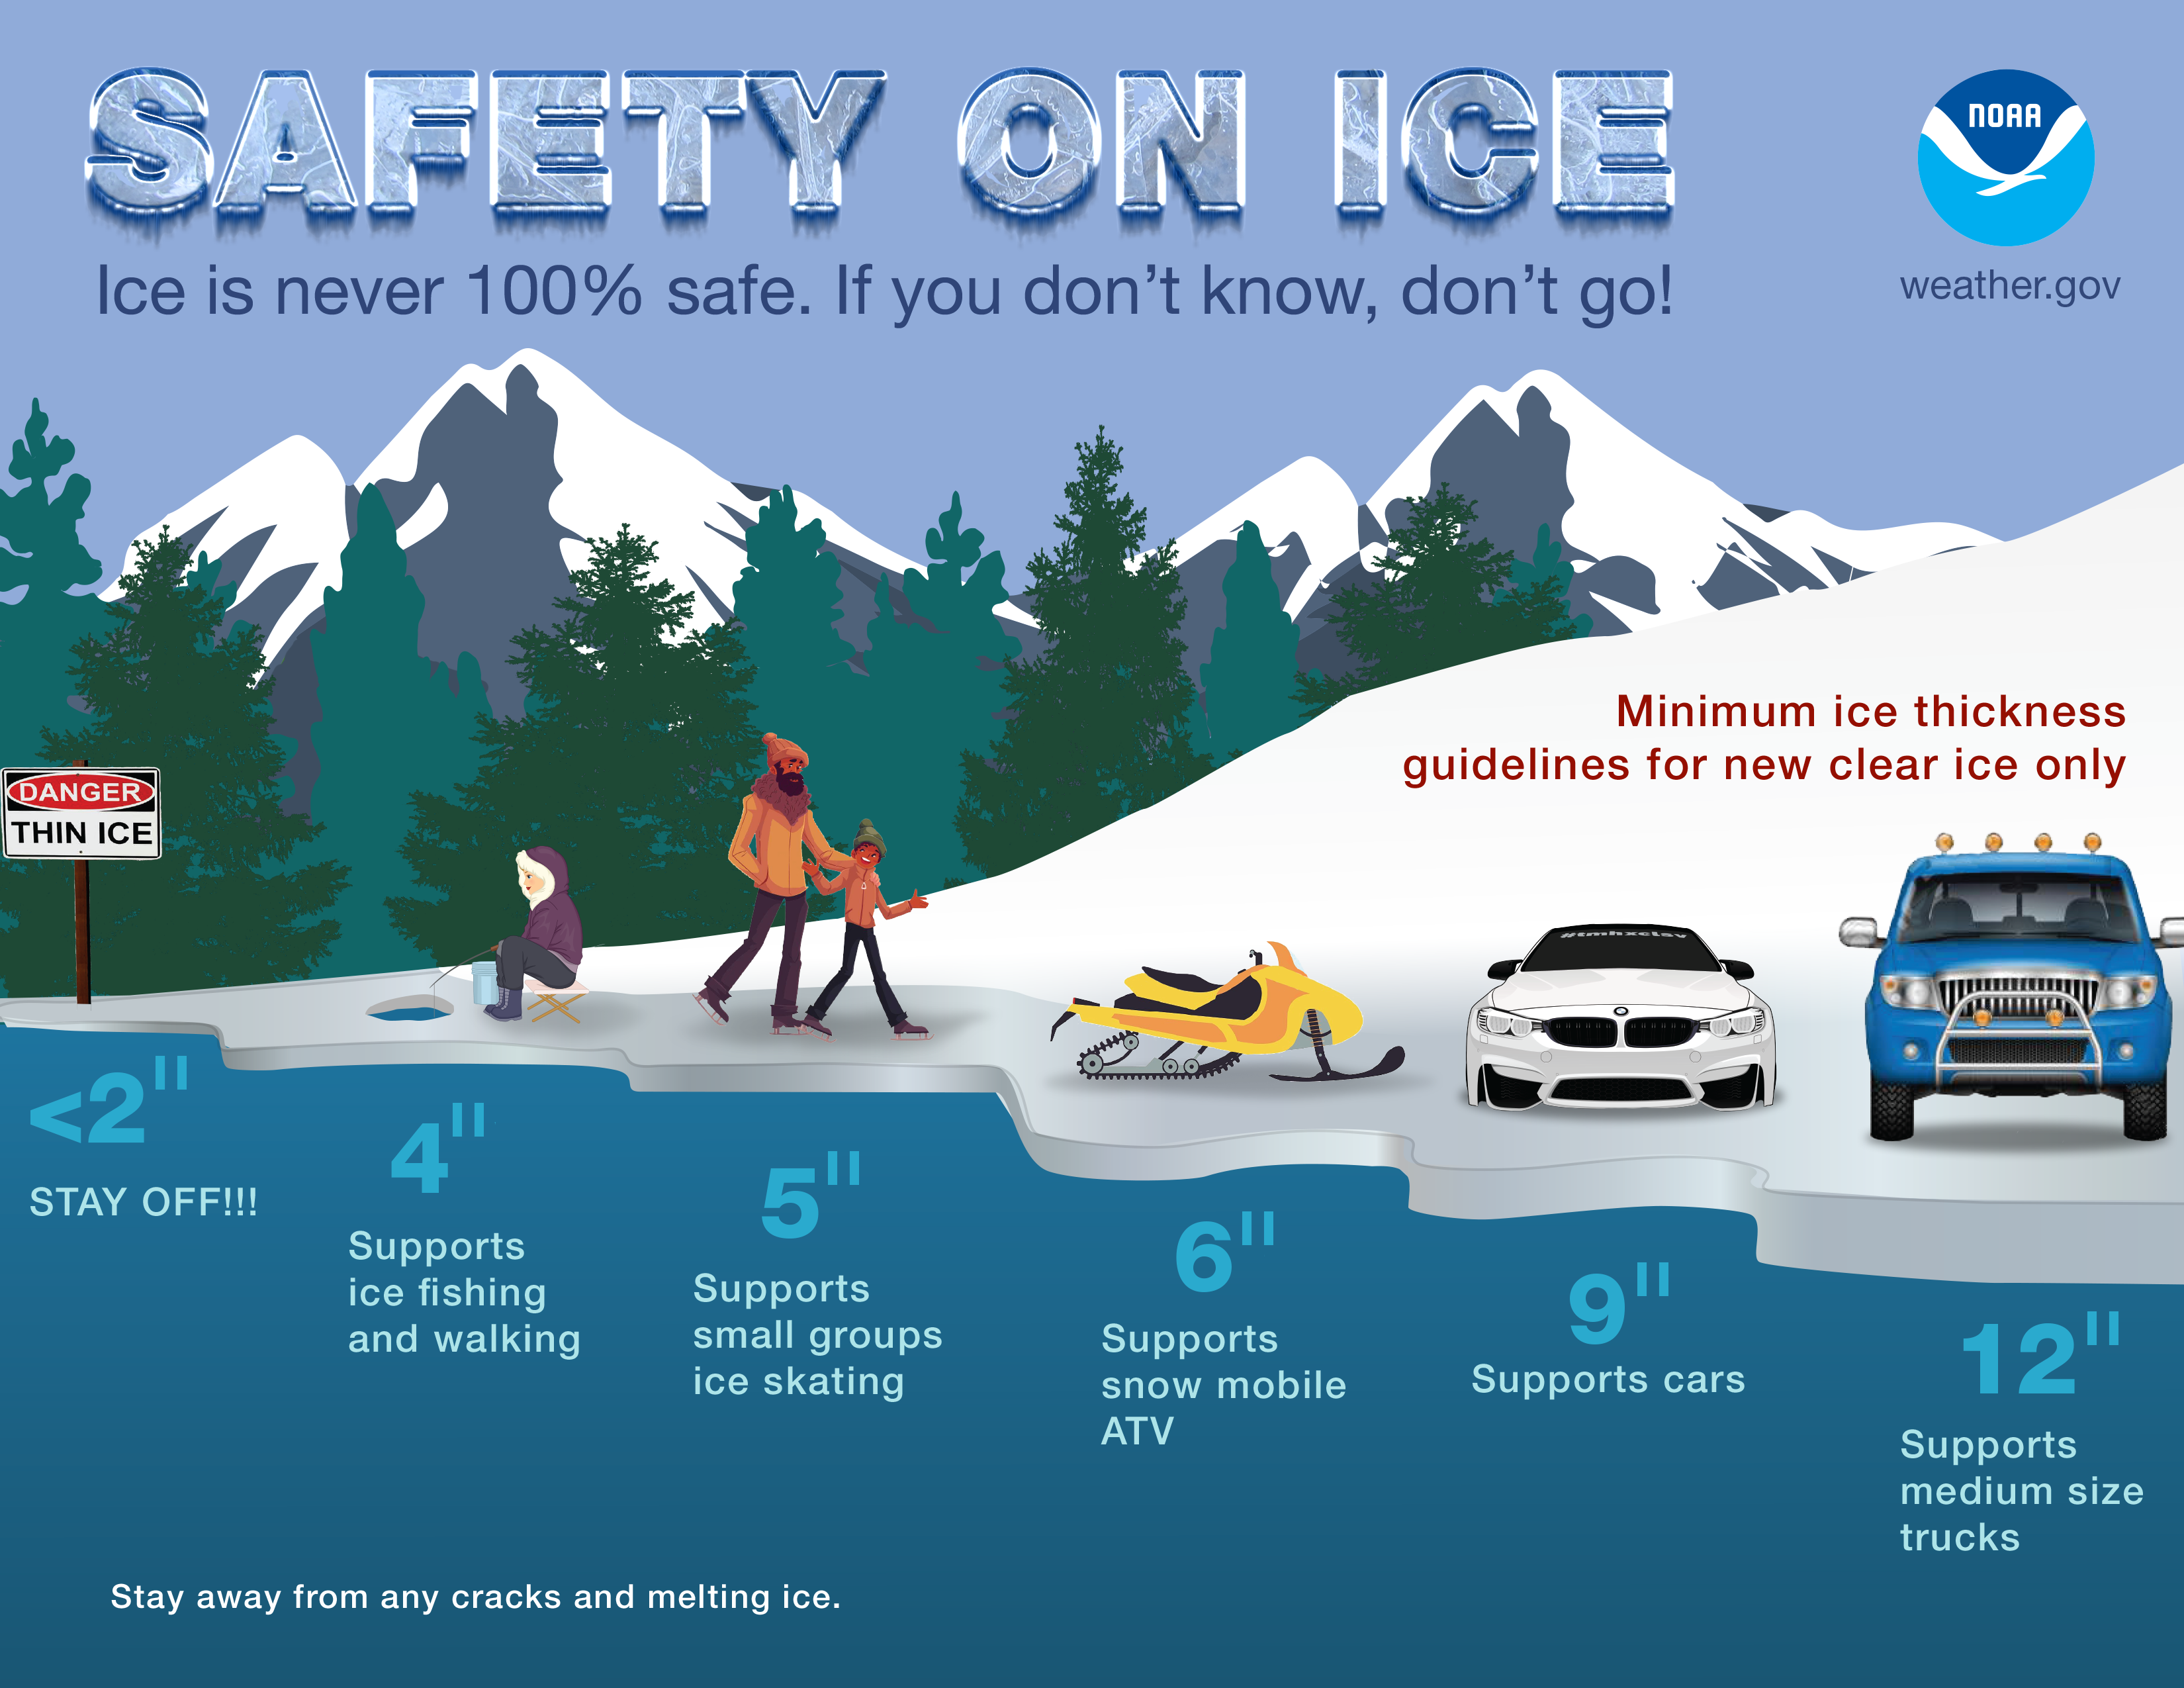 Safety On Ice: Ice is never 100% safe. If you don't know, don't go! Minimum ice thickness guidelines for new, clear ice only: Less than 2 inches: stay off! 4 inches: supports ice fishing and walking. 5 inches: supports small groups ice skating. 6 inches: supports snow mobile ATV. 9 inches: supports cars. 12 inches: supports medium size trucks. Stay away from any cracks and melting ice.